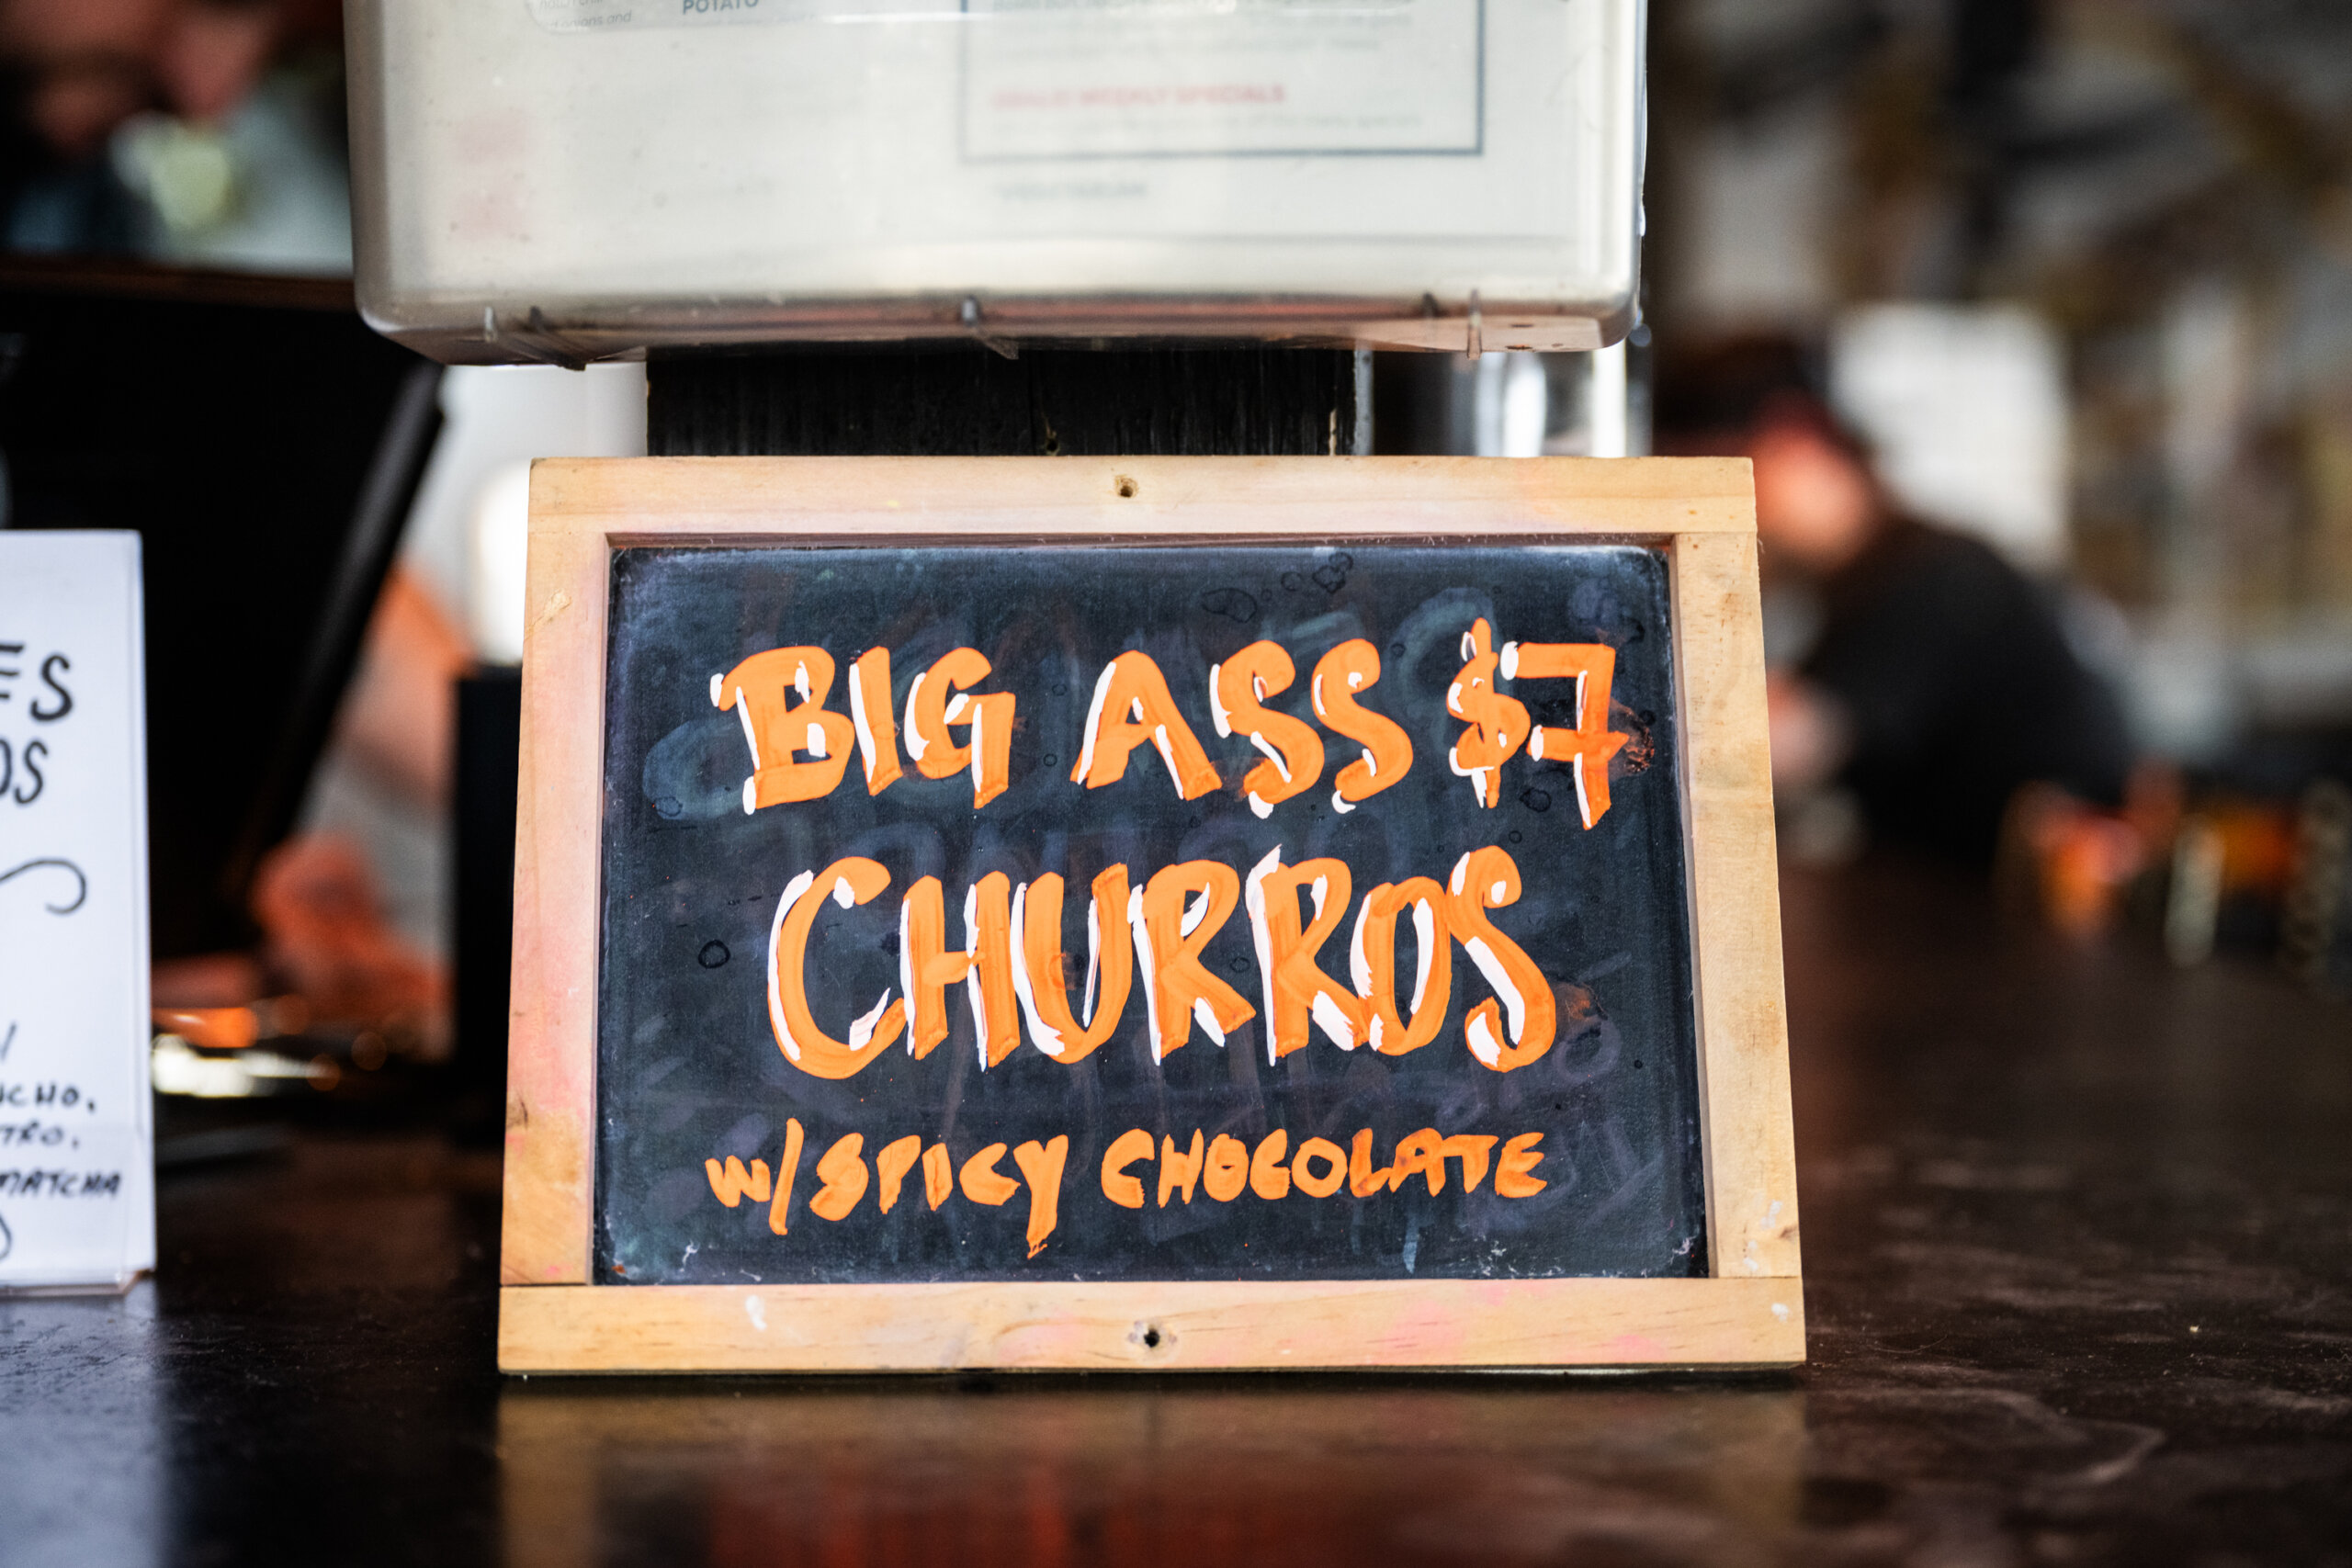 A sign advertising "Big Ass Churros" for $7